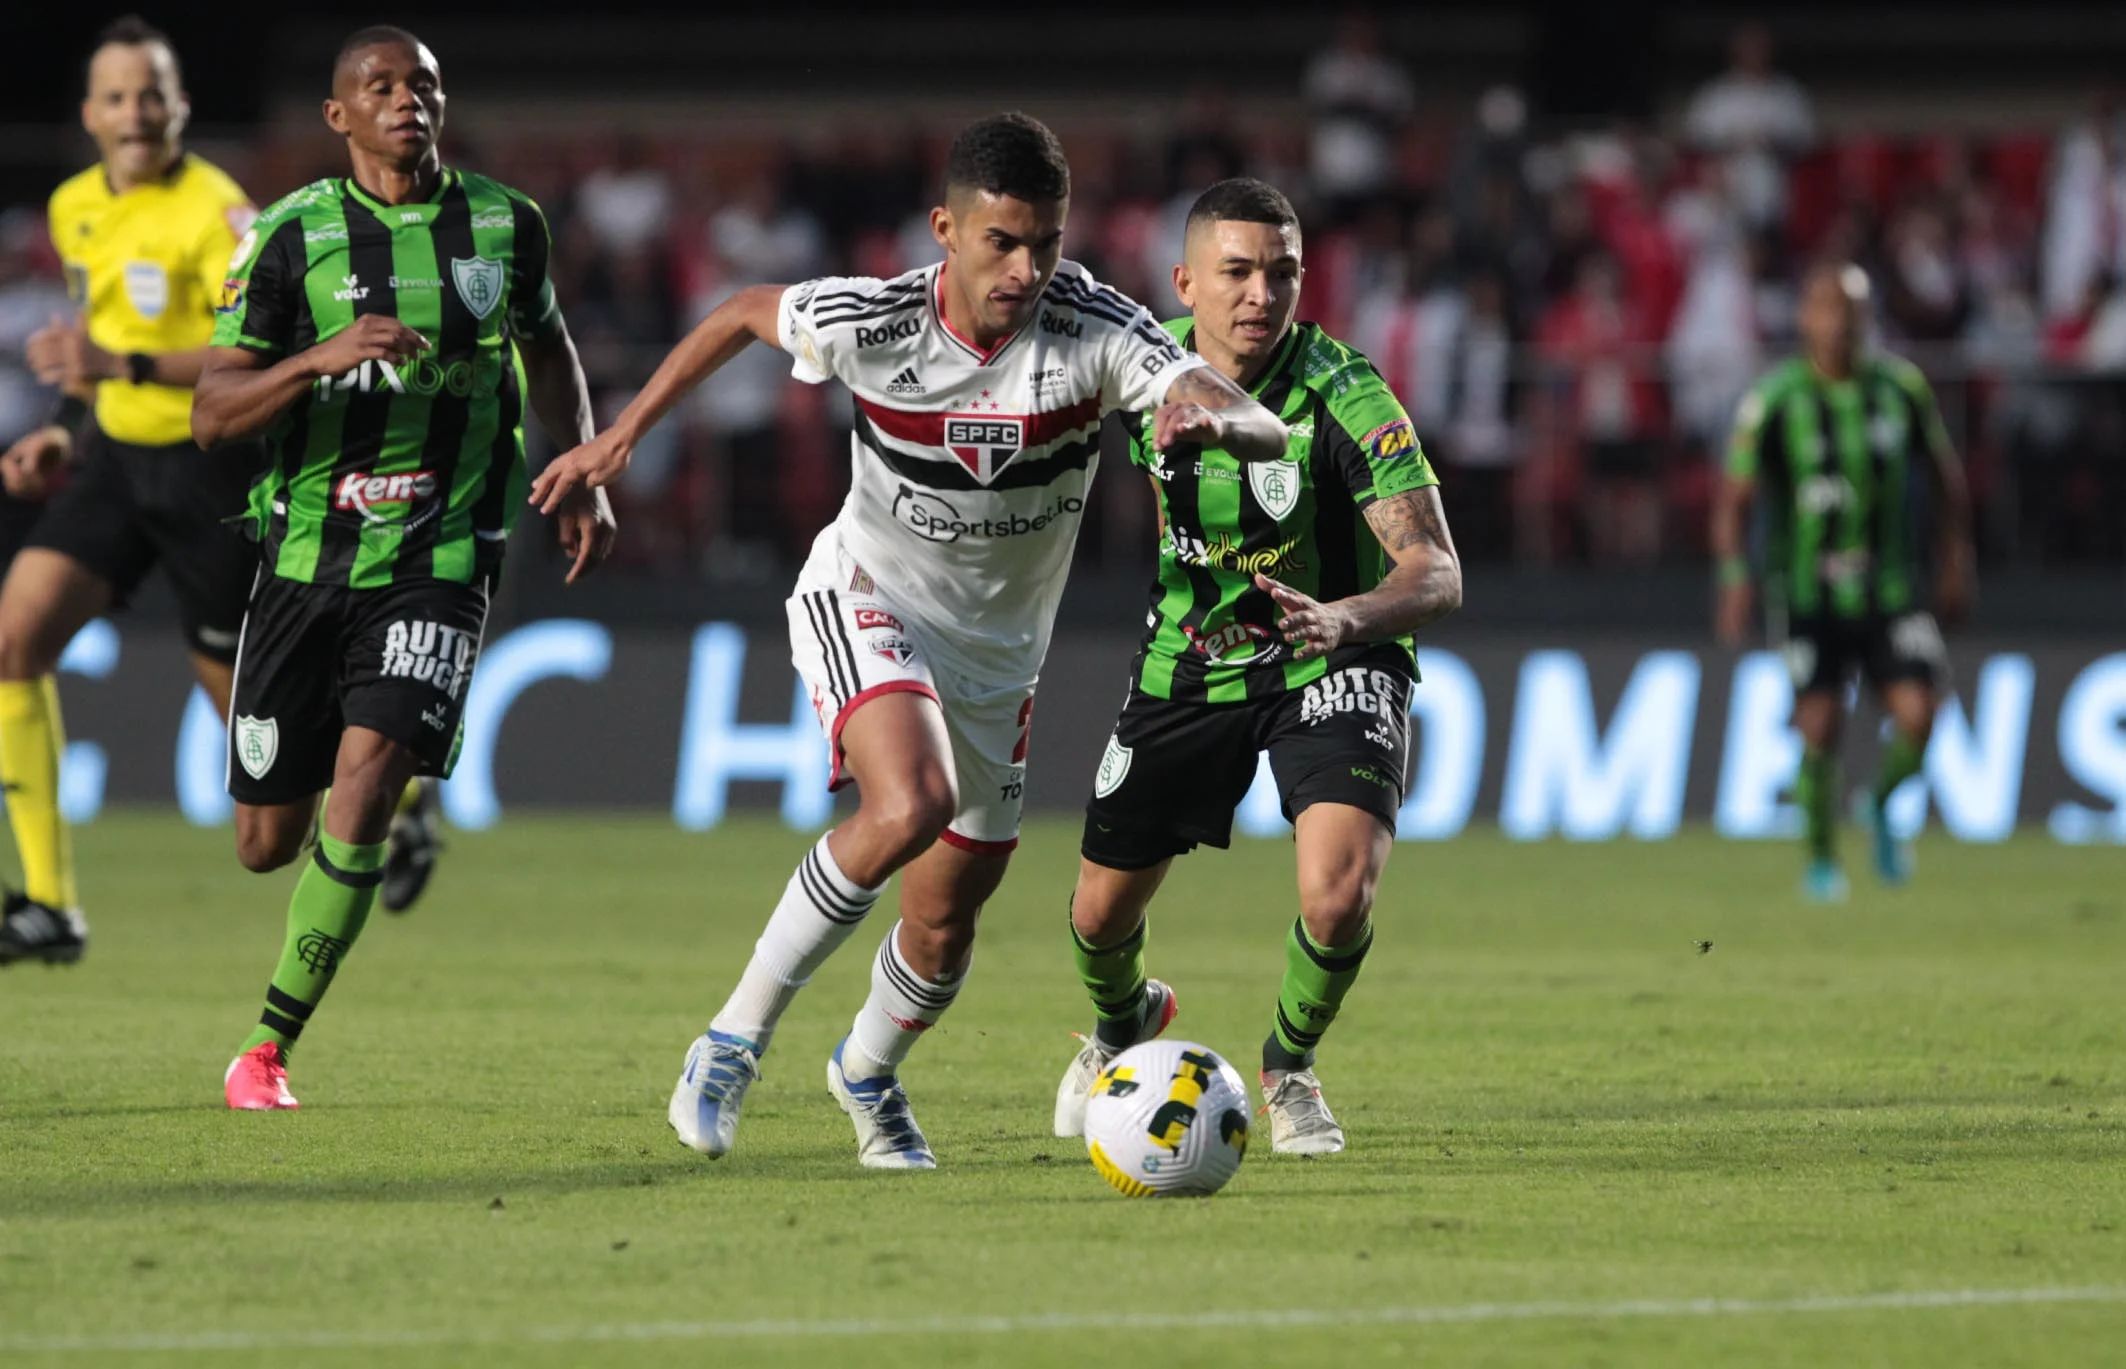 The Rise and Success of America MG in Brazilian Football